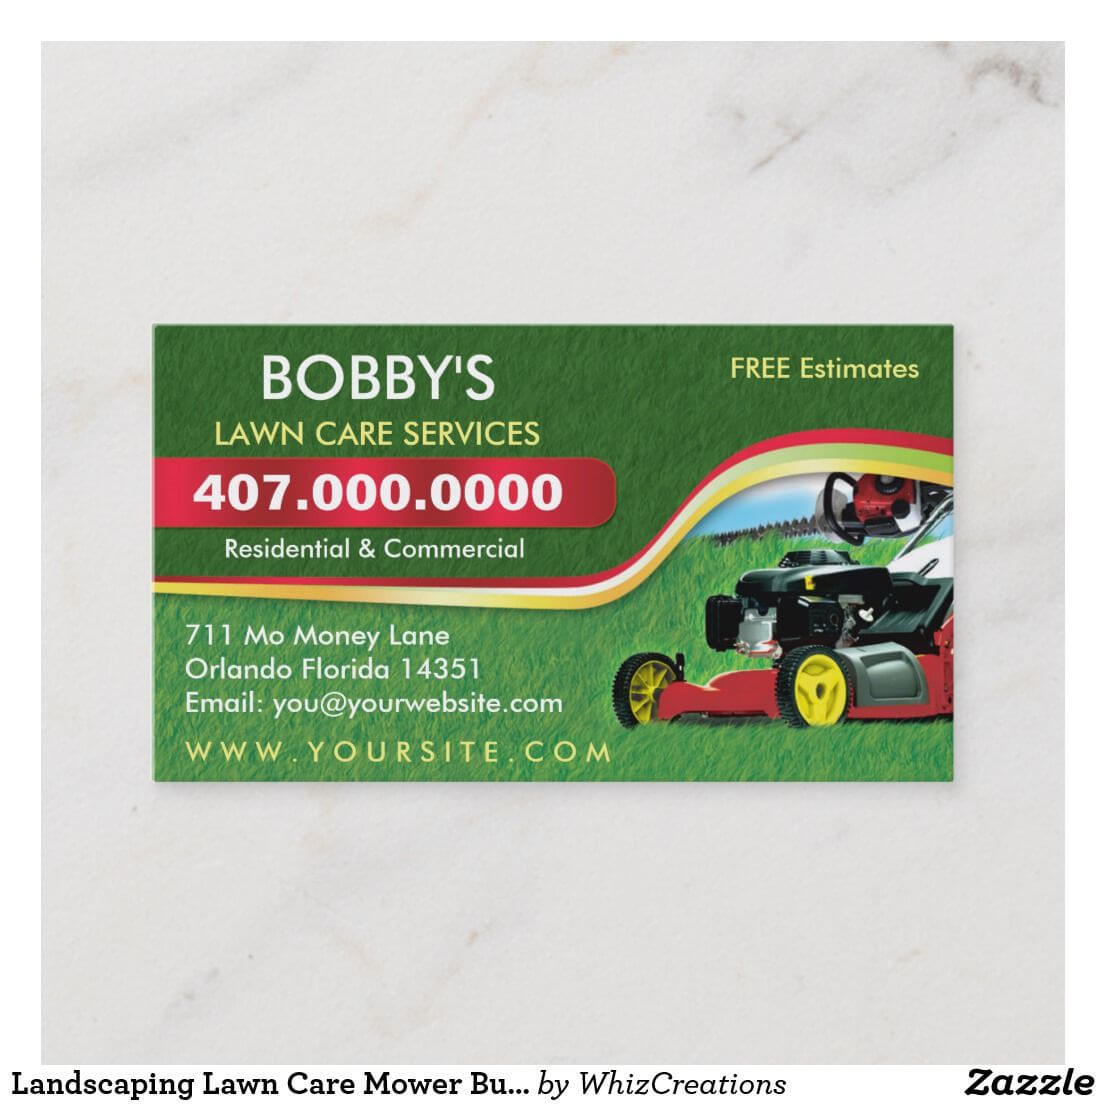 Landscaping Lawn Care Mower Business Card Template | Zazzle Regarding Lawn Care Business Cards Templates Free